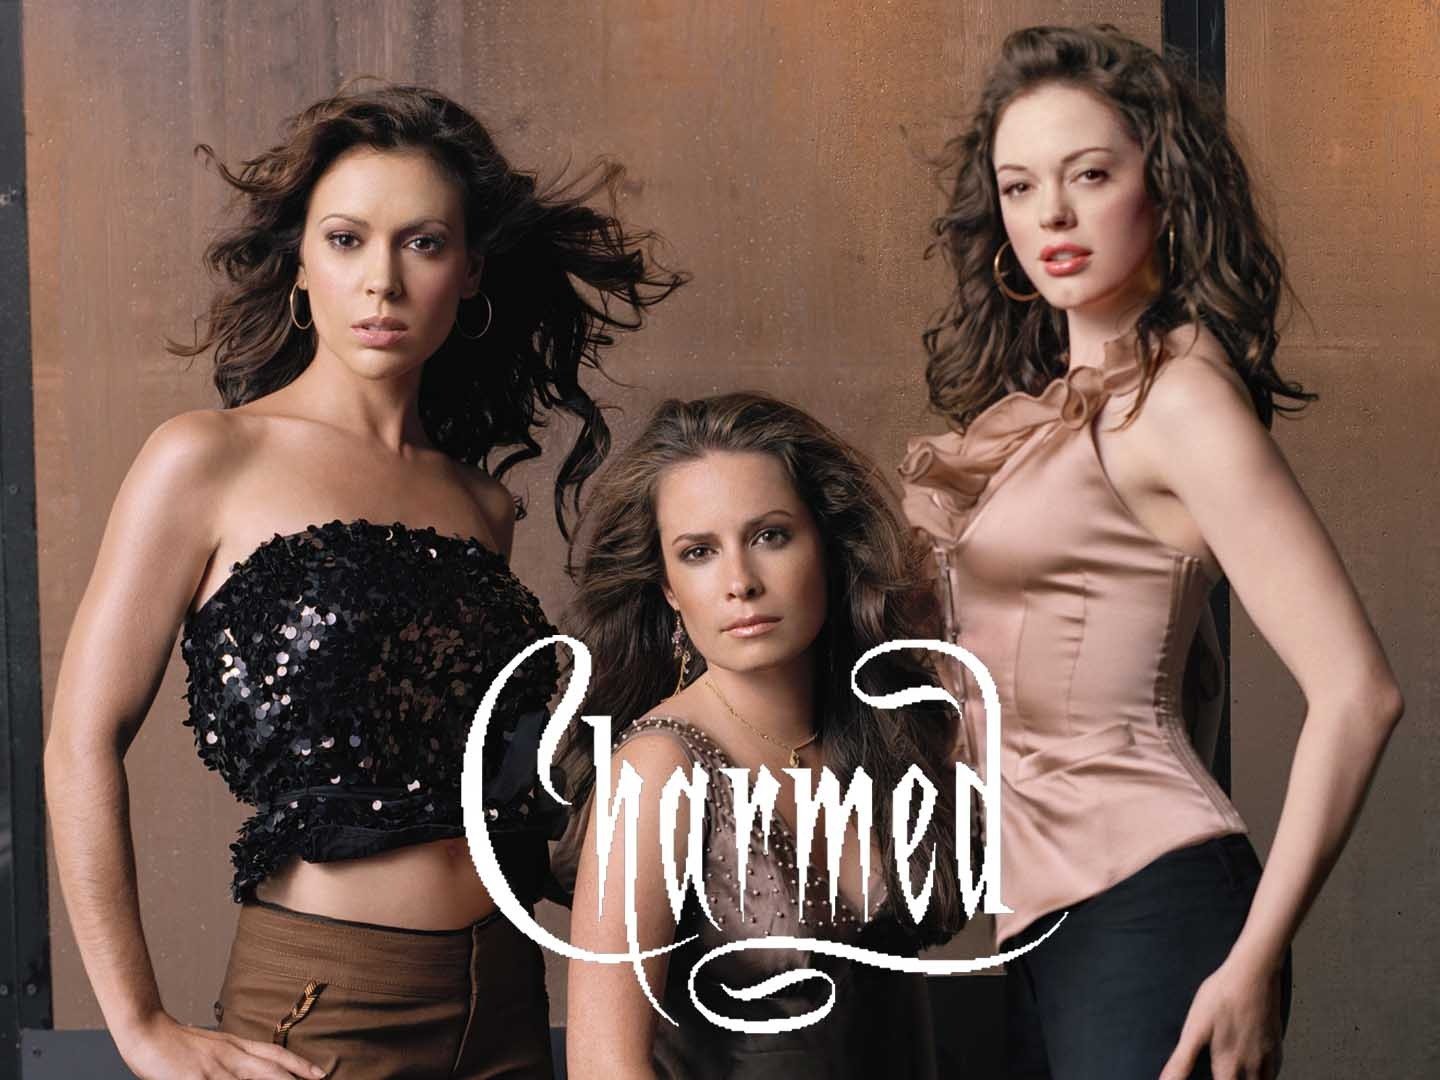 Top charmed episodes